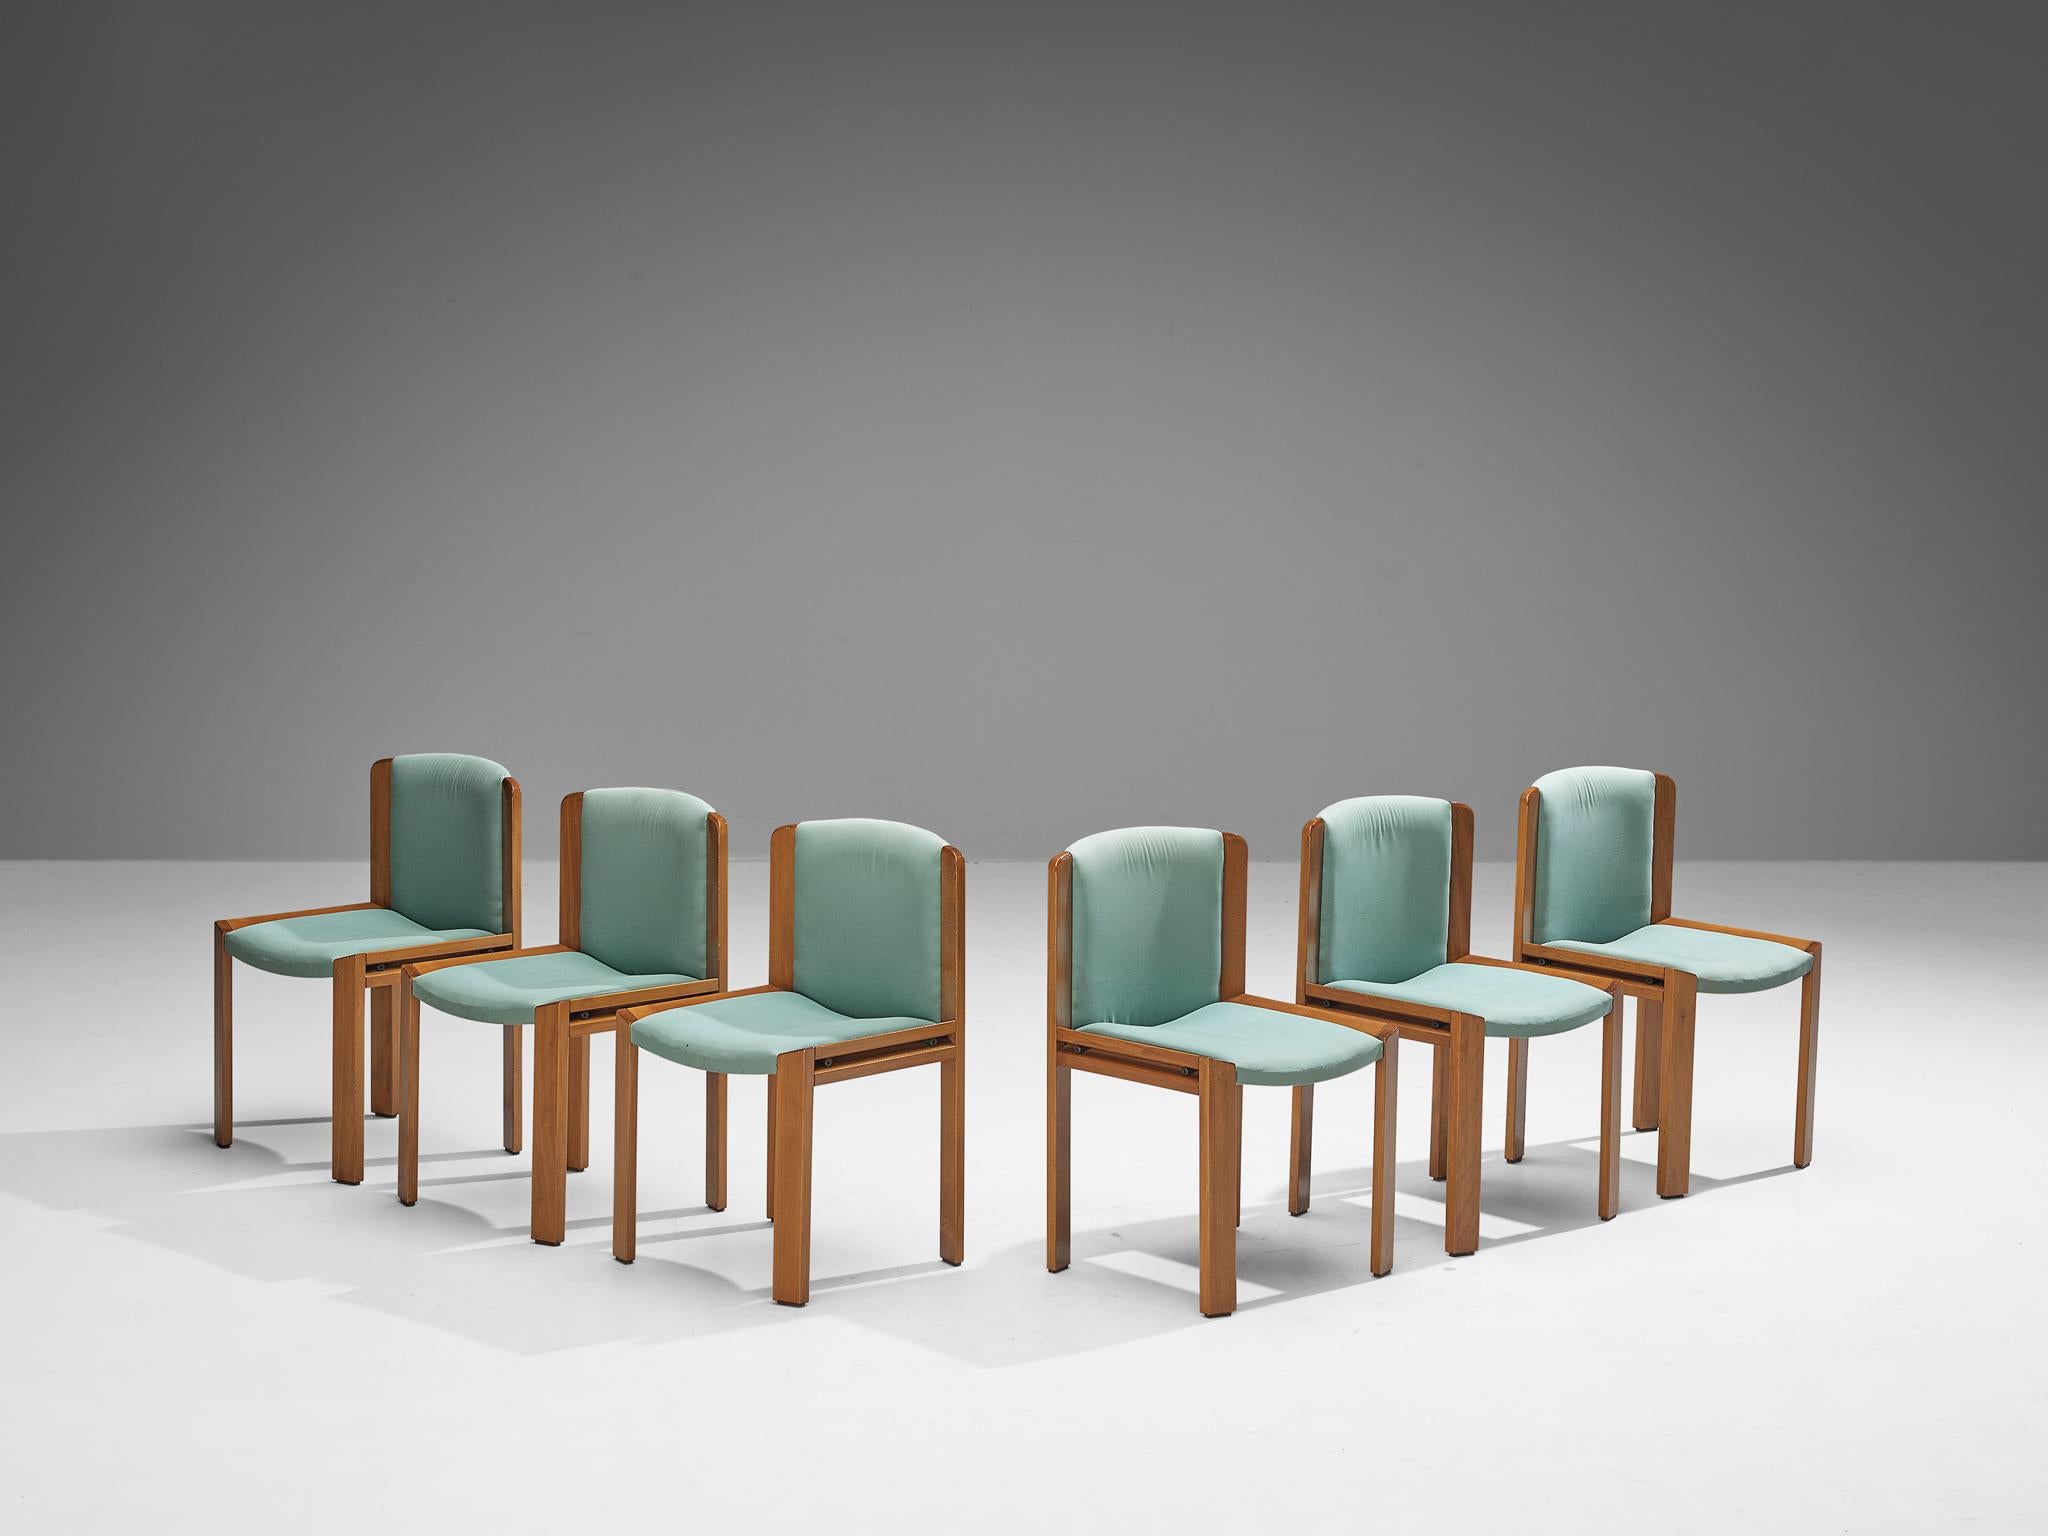 Joe Colombo for Pozzi, set of six dining chairs, model '300', fabric, stained beech, Italy, 1966

In 1966, Joe Colombo crafted a set of six dining chairs known as the ‘300’ model. Colombo prioritized practicality and the needs of the user, and